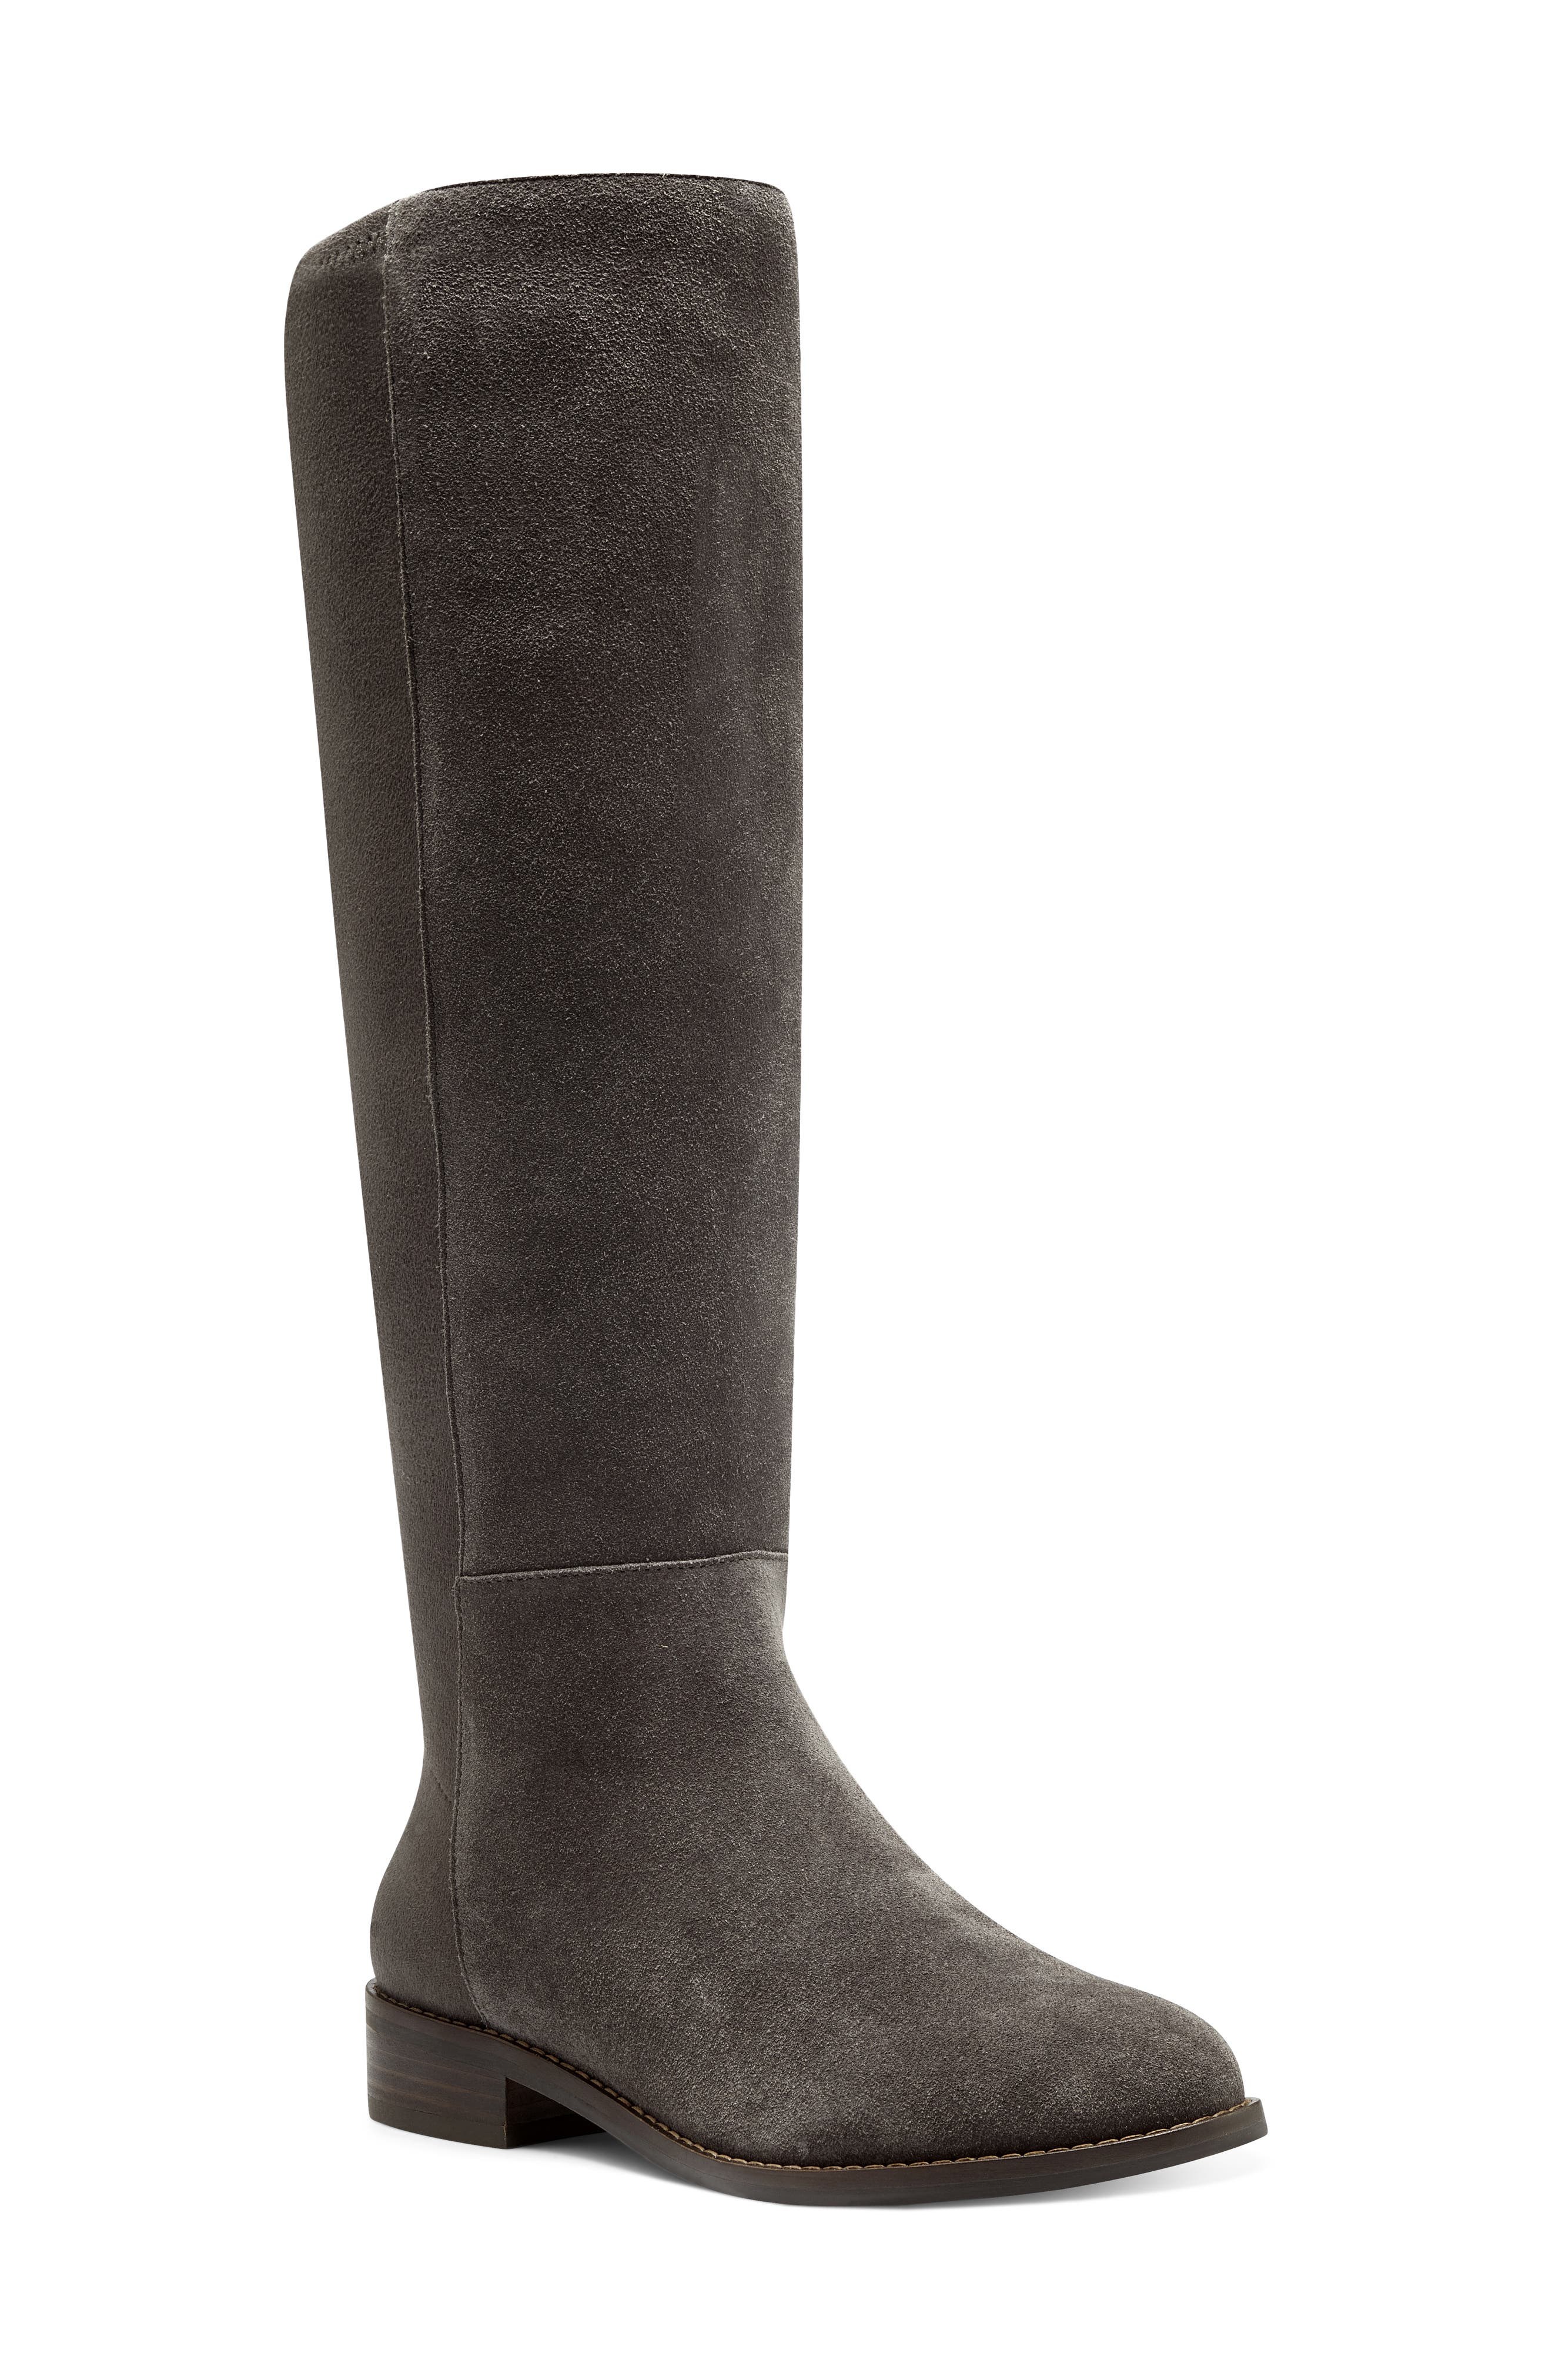 grey tall boots womens